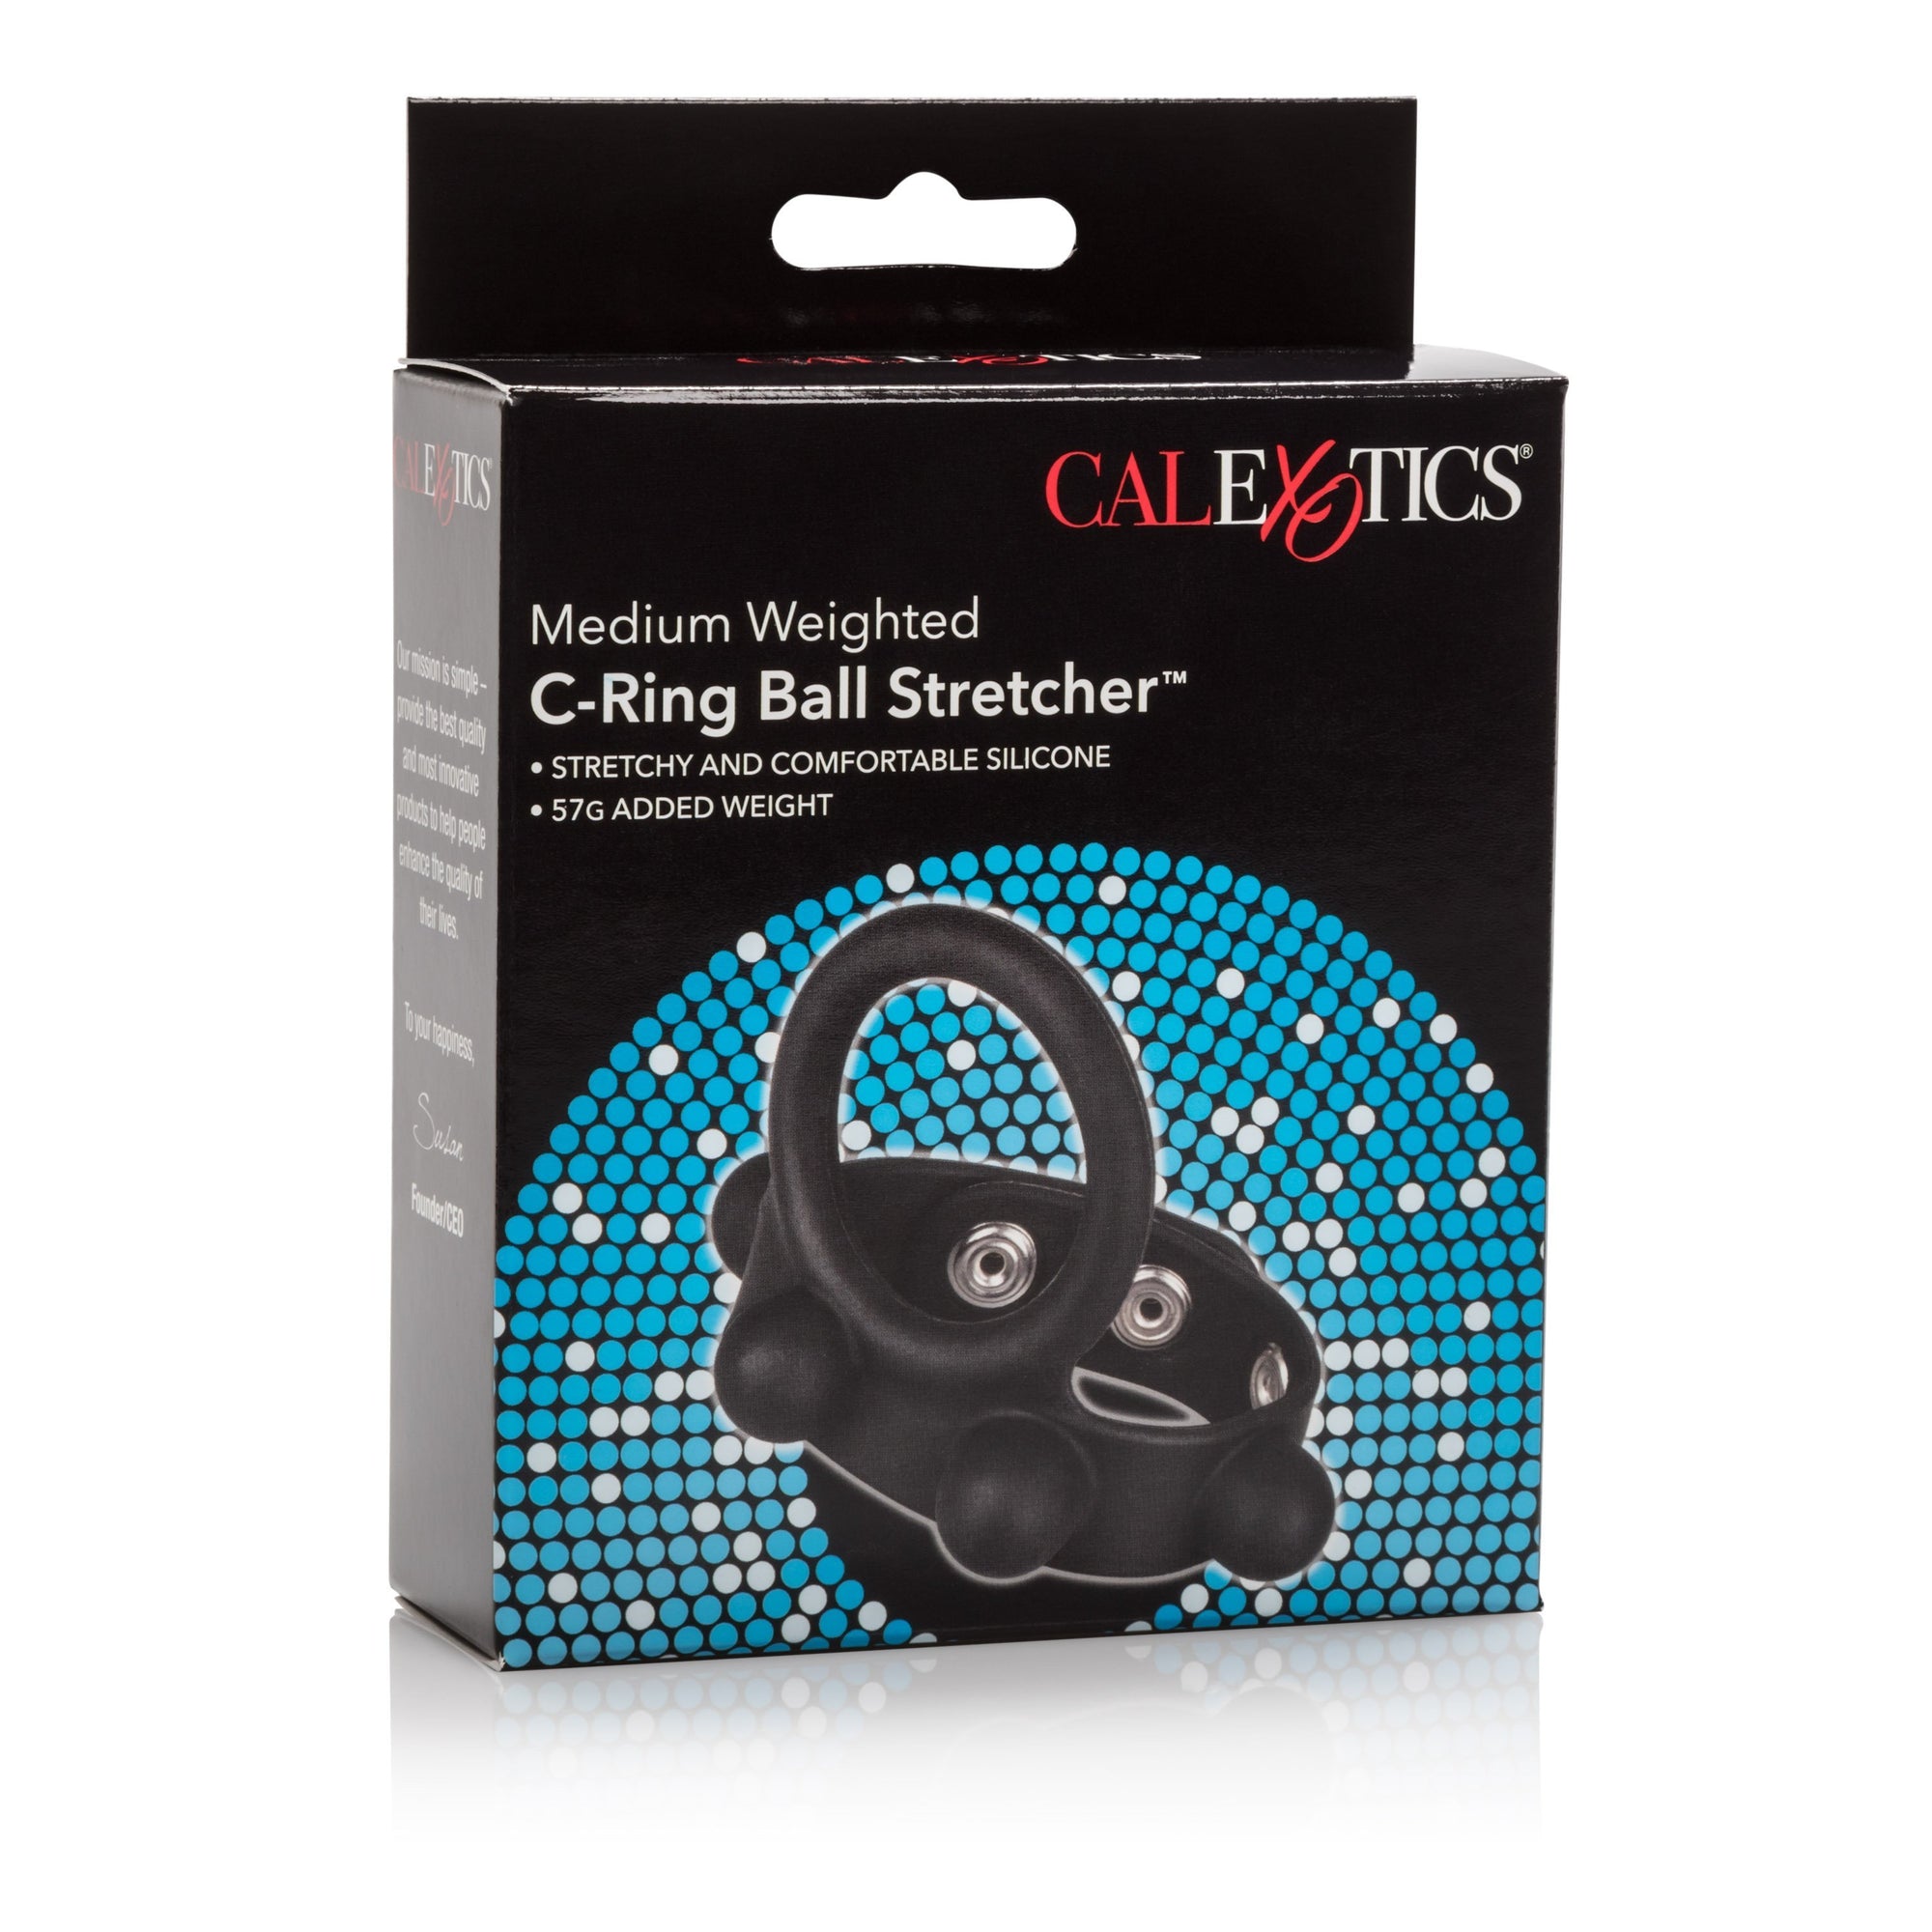 California Exotics - Medium Weighted C Ring Ball Stretcher Cock Ring (Black) Silicone Cock Ring (Non Vibration) Singapore